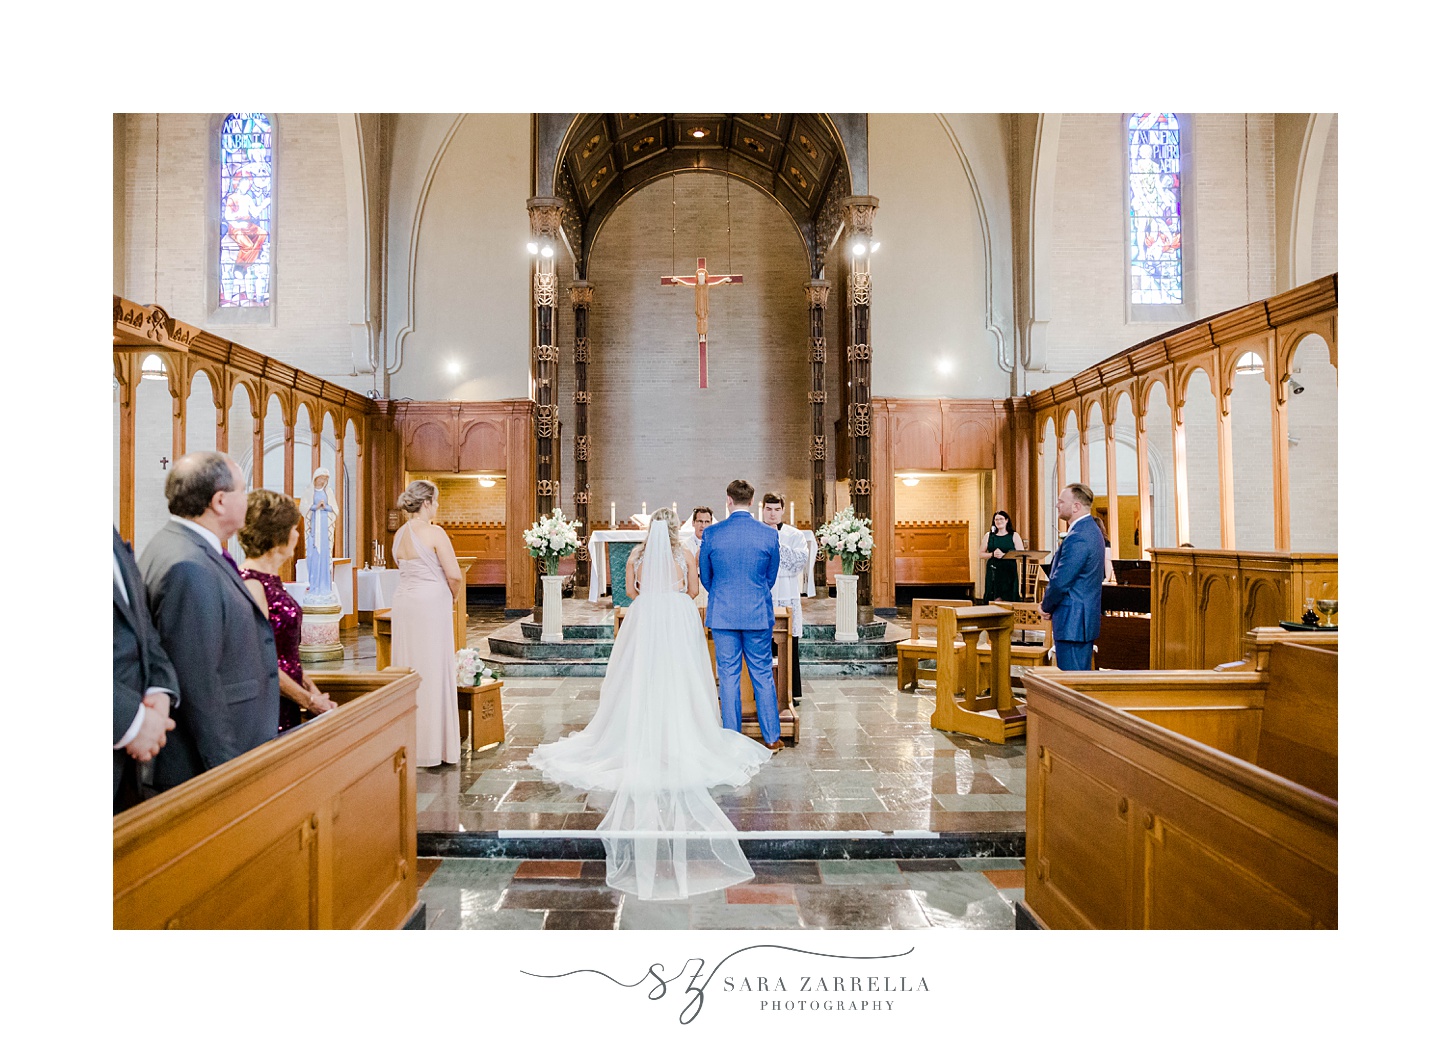 bride and groom stand at alter during traditional wedding ceremony in Rhode Island church